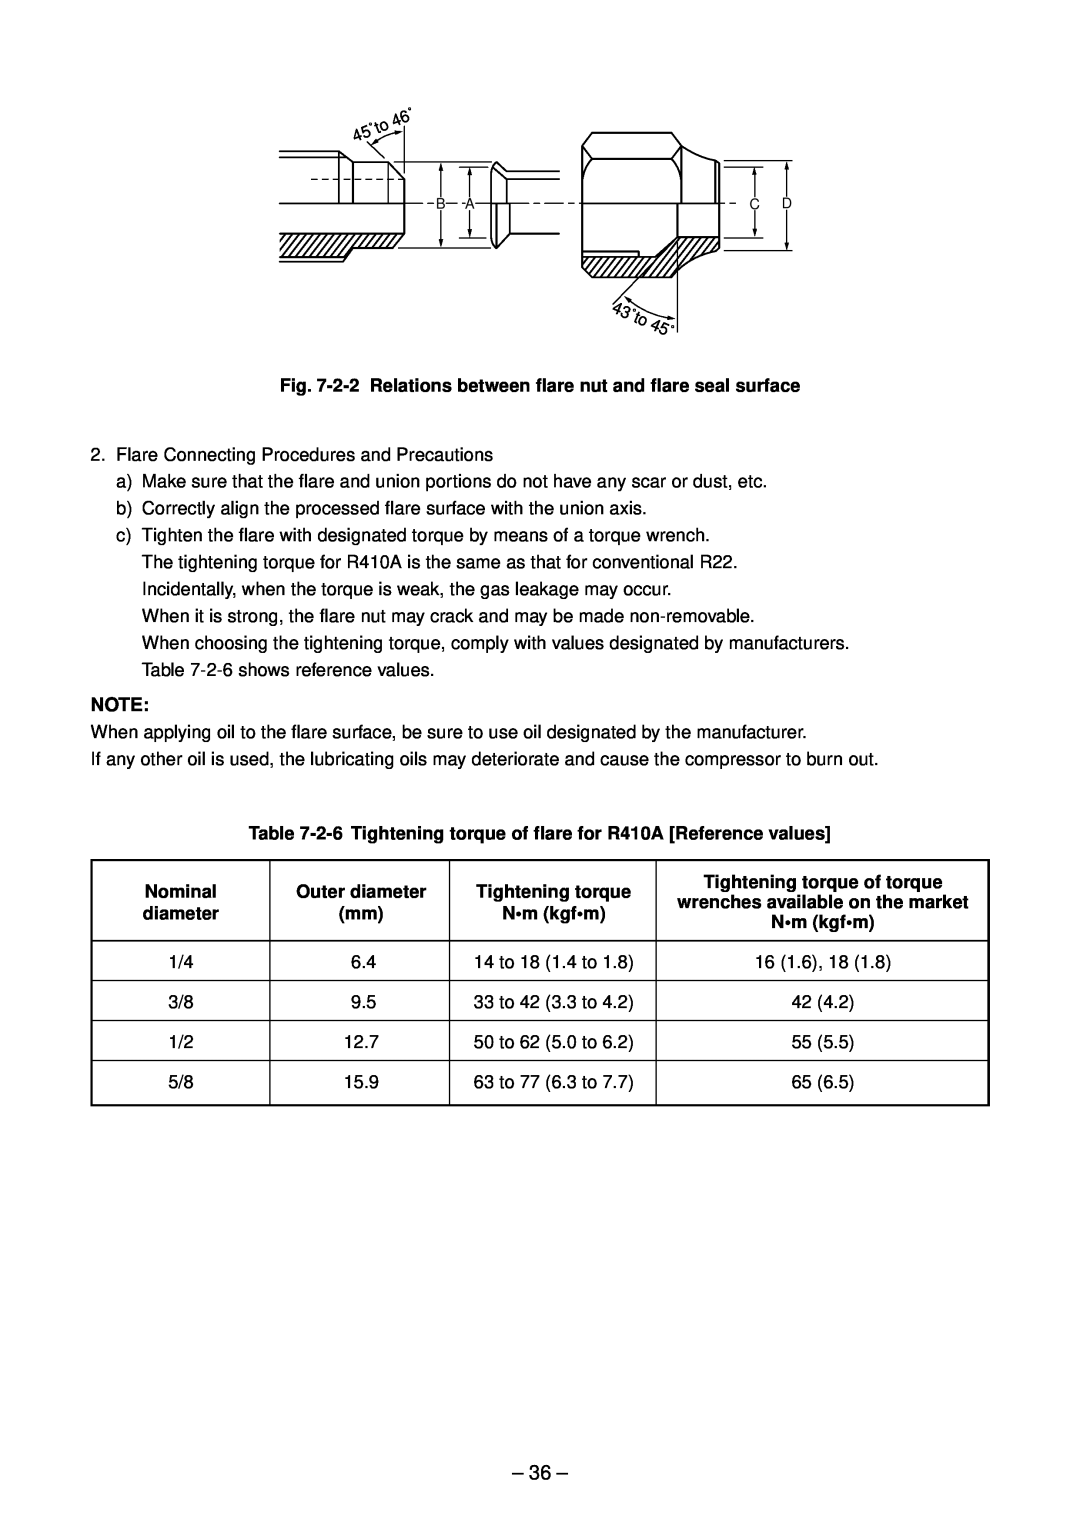 Toshiba RAV-SP454ATZ-E 2-2 Relations between flare nut and flare seal surface, Nominal, Outer diameter, Tightening torque 